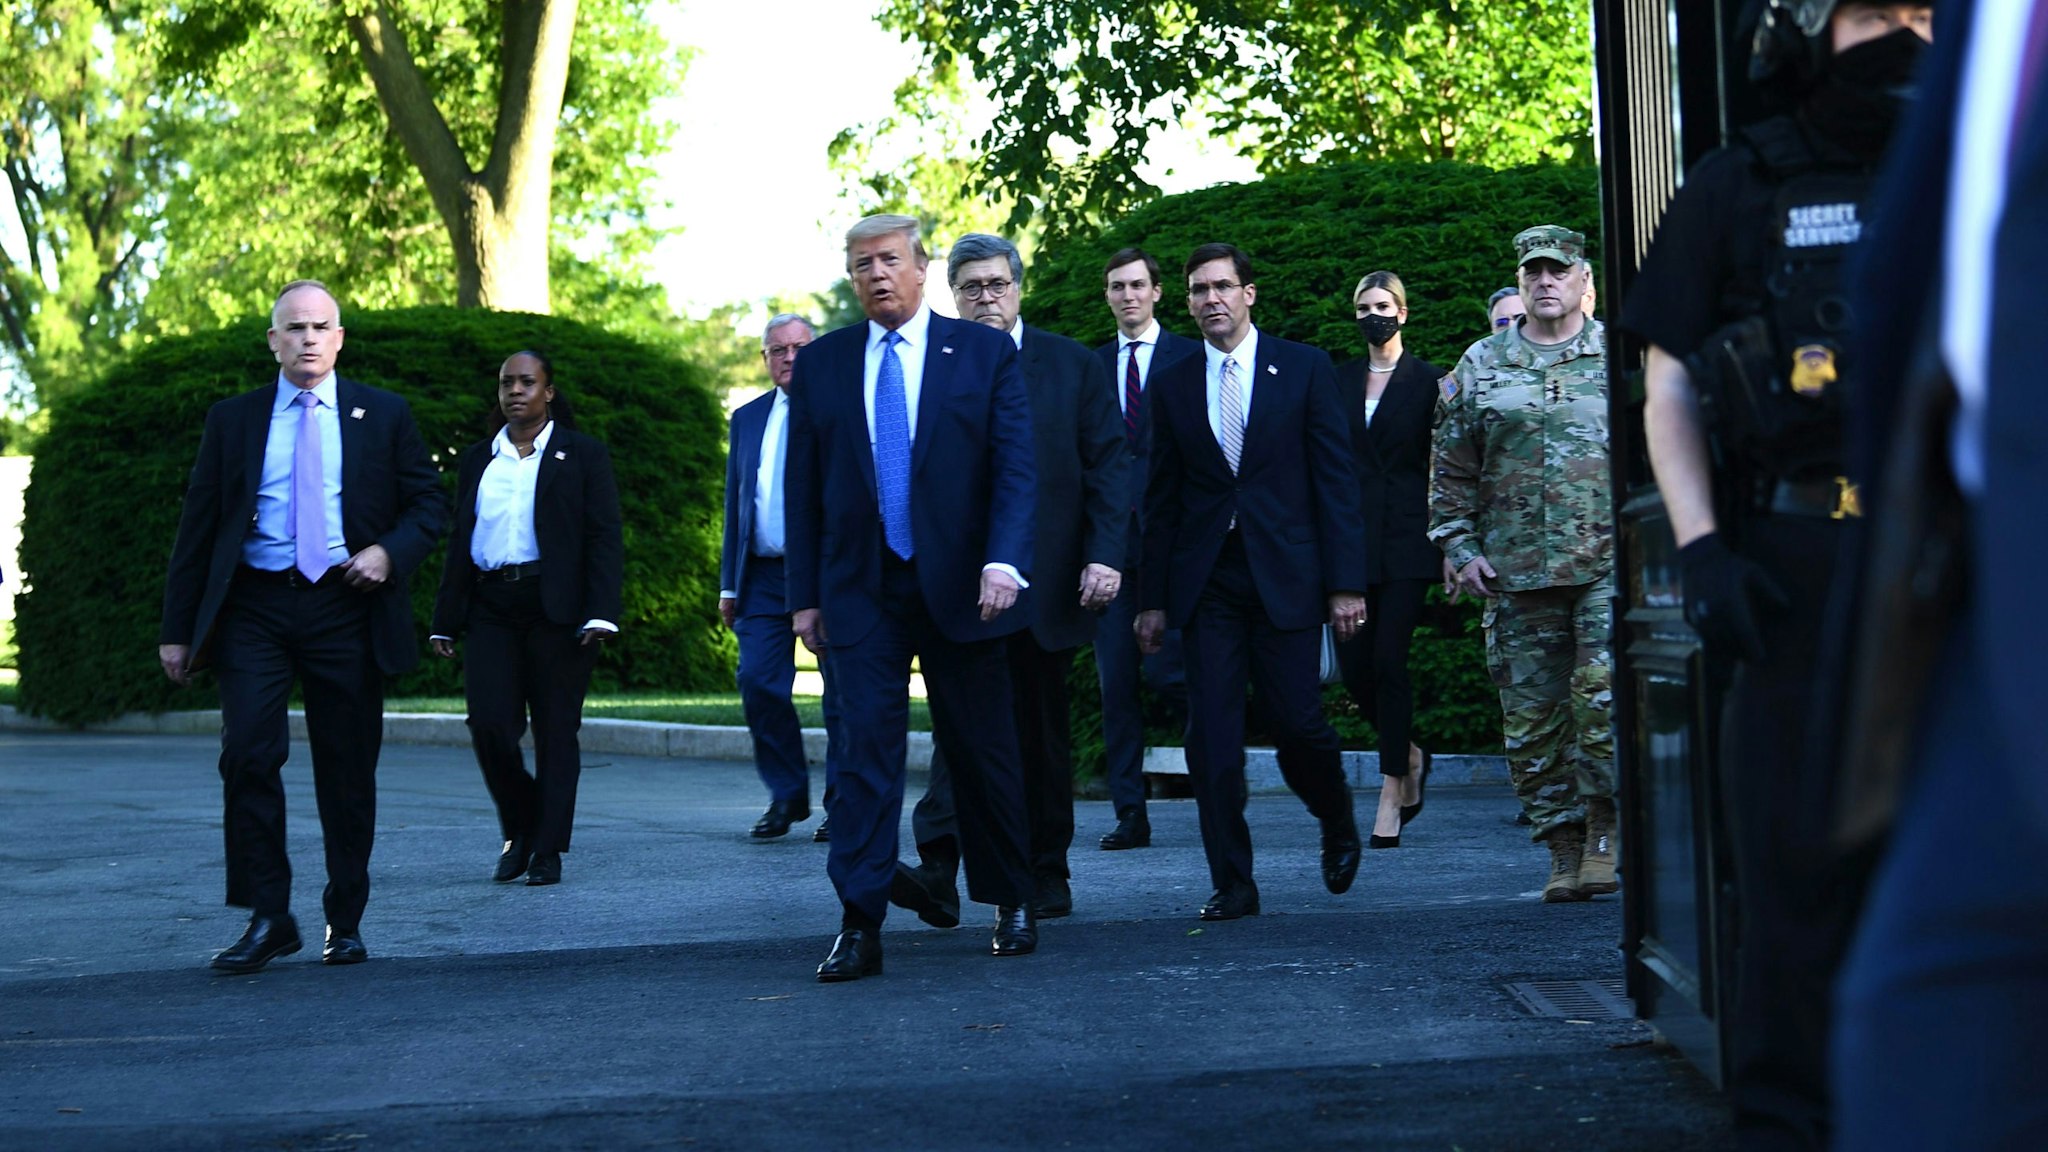 US President Donald Trump leaves the White House on foot to go to St John's Episcopal church across Lafayette Park in Washington, DC on June 1, 2020. - US President Donald Trump was due to make a televised address to the nation on Monday after days of anti-racism protests against police brutality that have erupted into violence. The White House announced that the president would make remarks imminently after he has been criticized for not publicly addressing in the crisis in recent days.